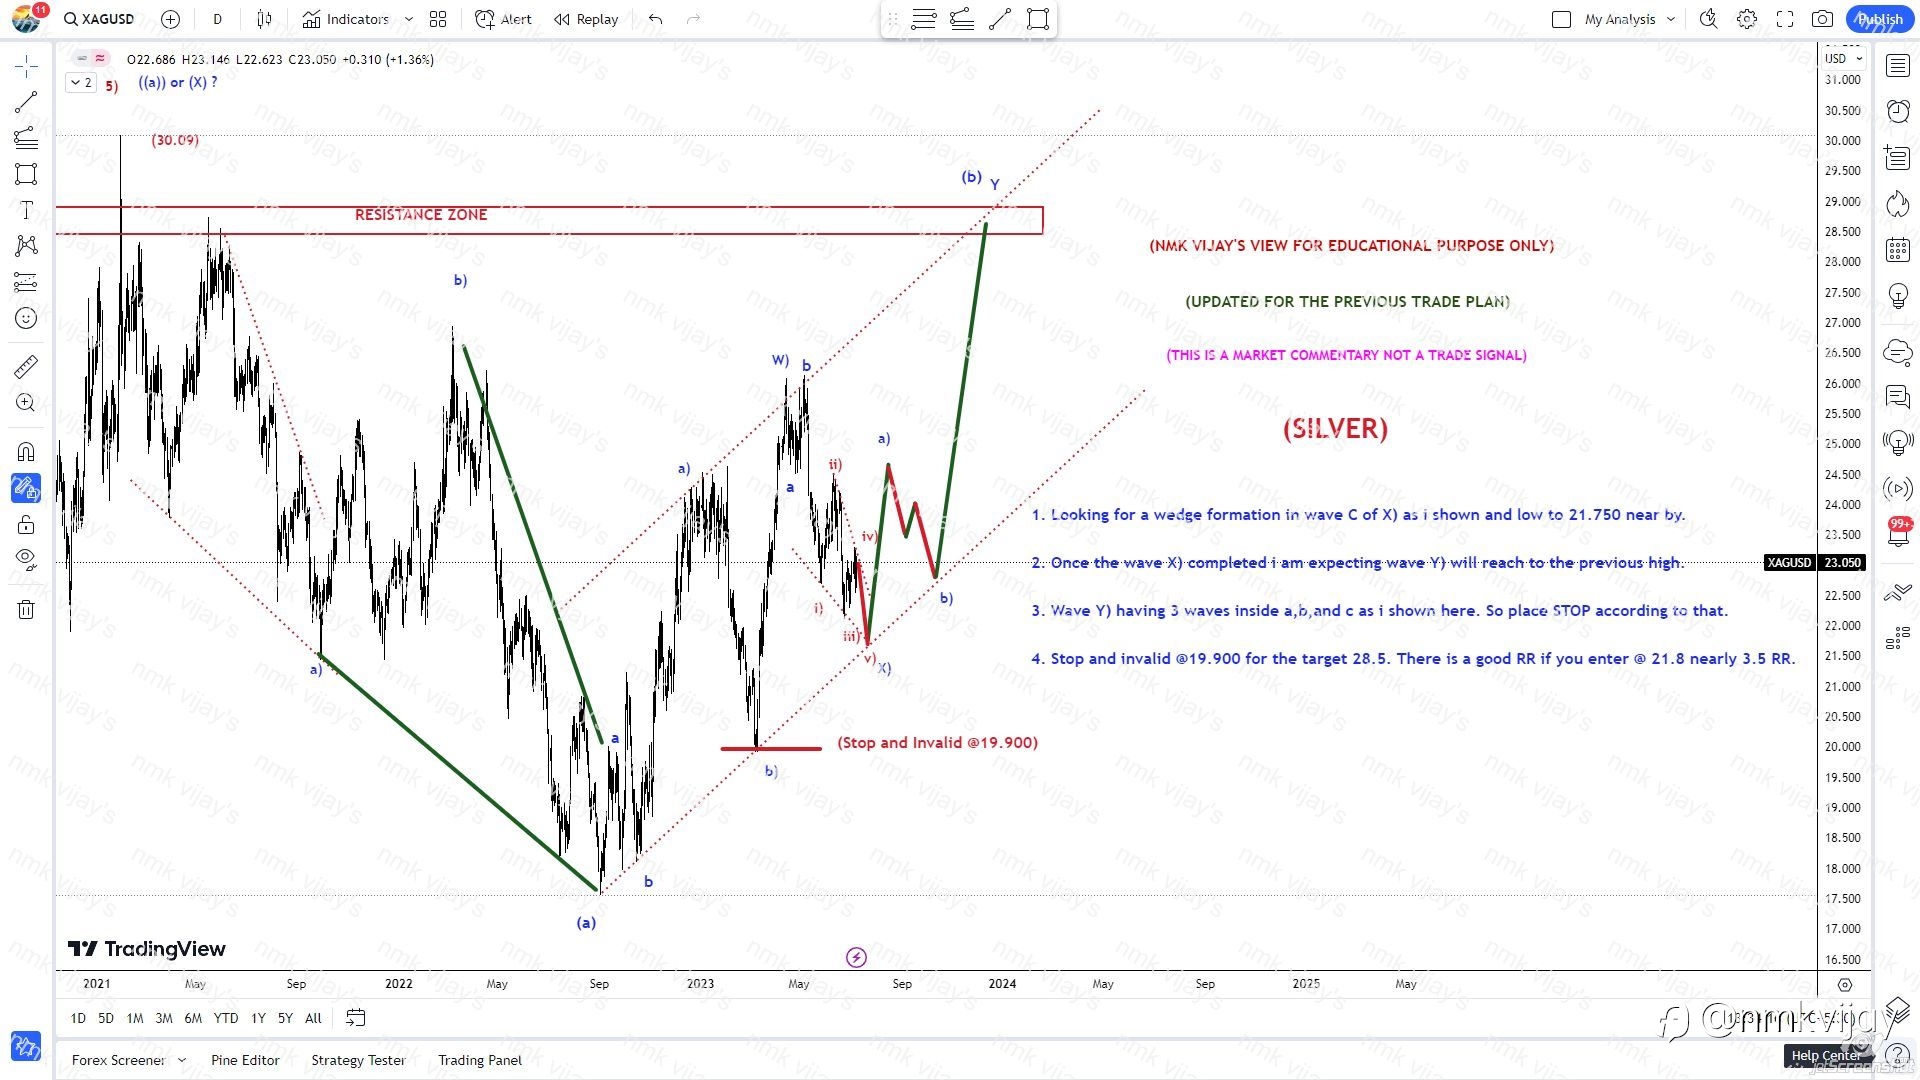 SILVER-Wedge in Wave c of X) and then to 28.5 for Y) ?